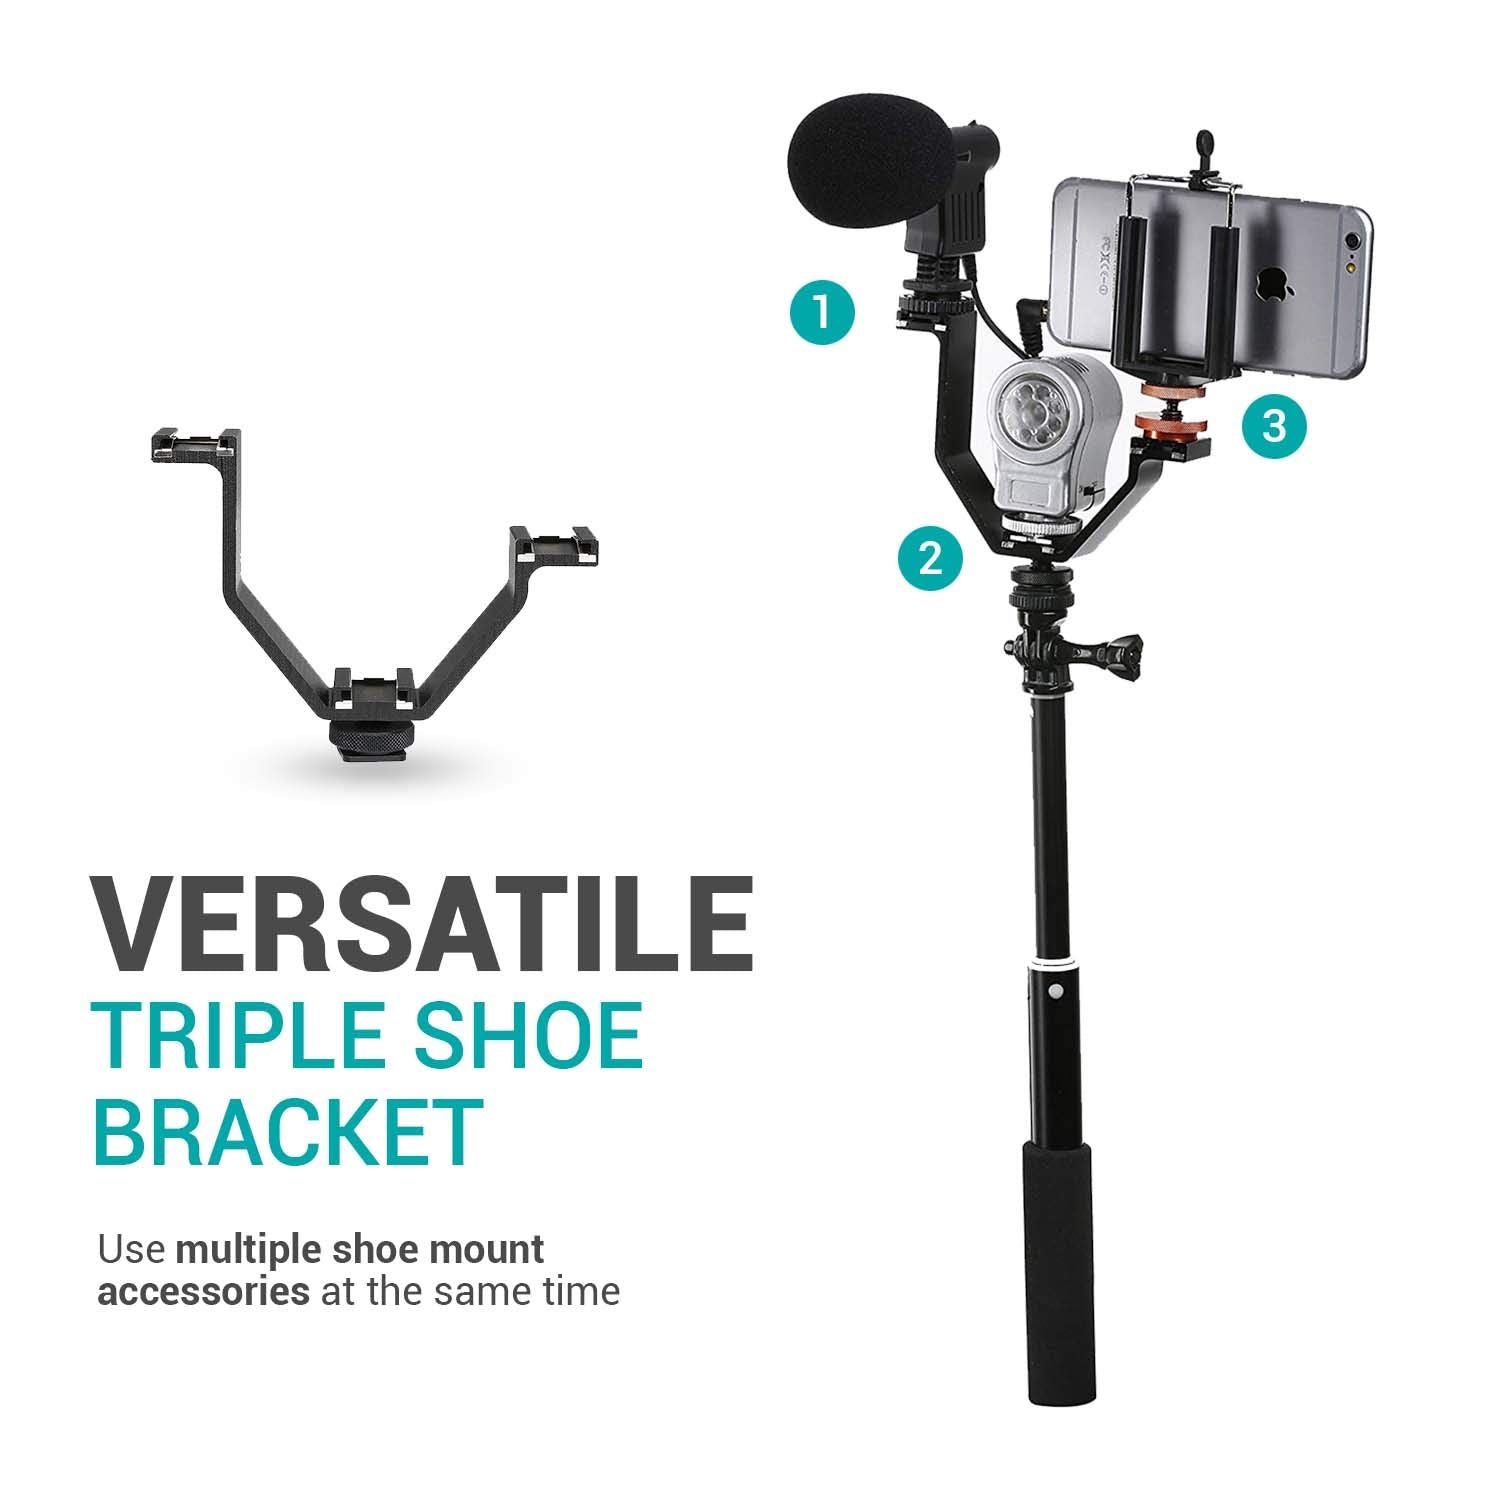 Movo Heavy-Duty Video Accessory Triple Shoe Bracket for Lights, Monitors, Microphones and More  - Very Good